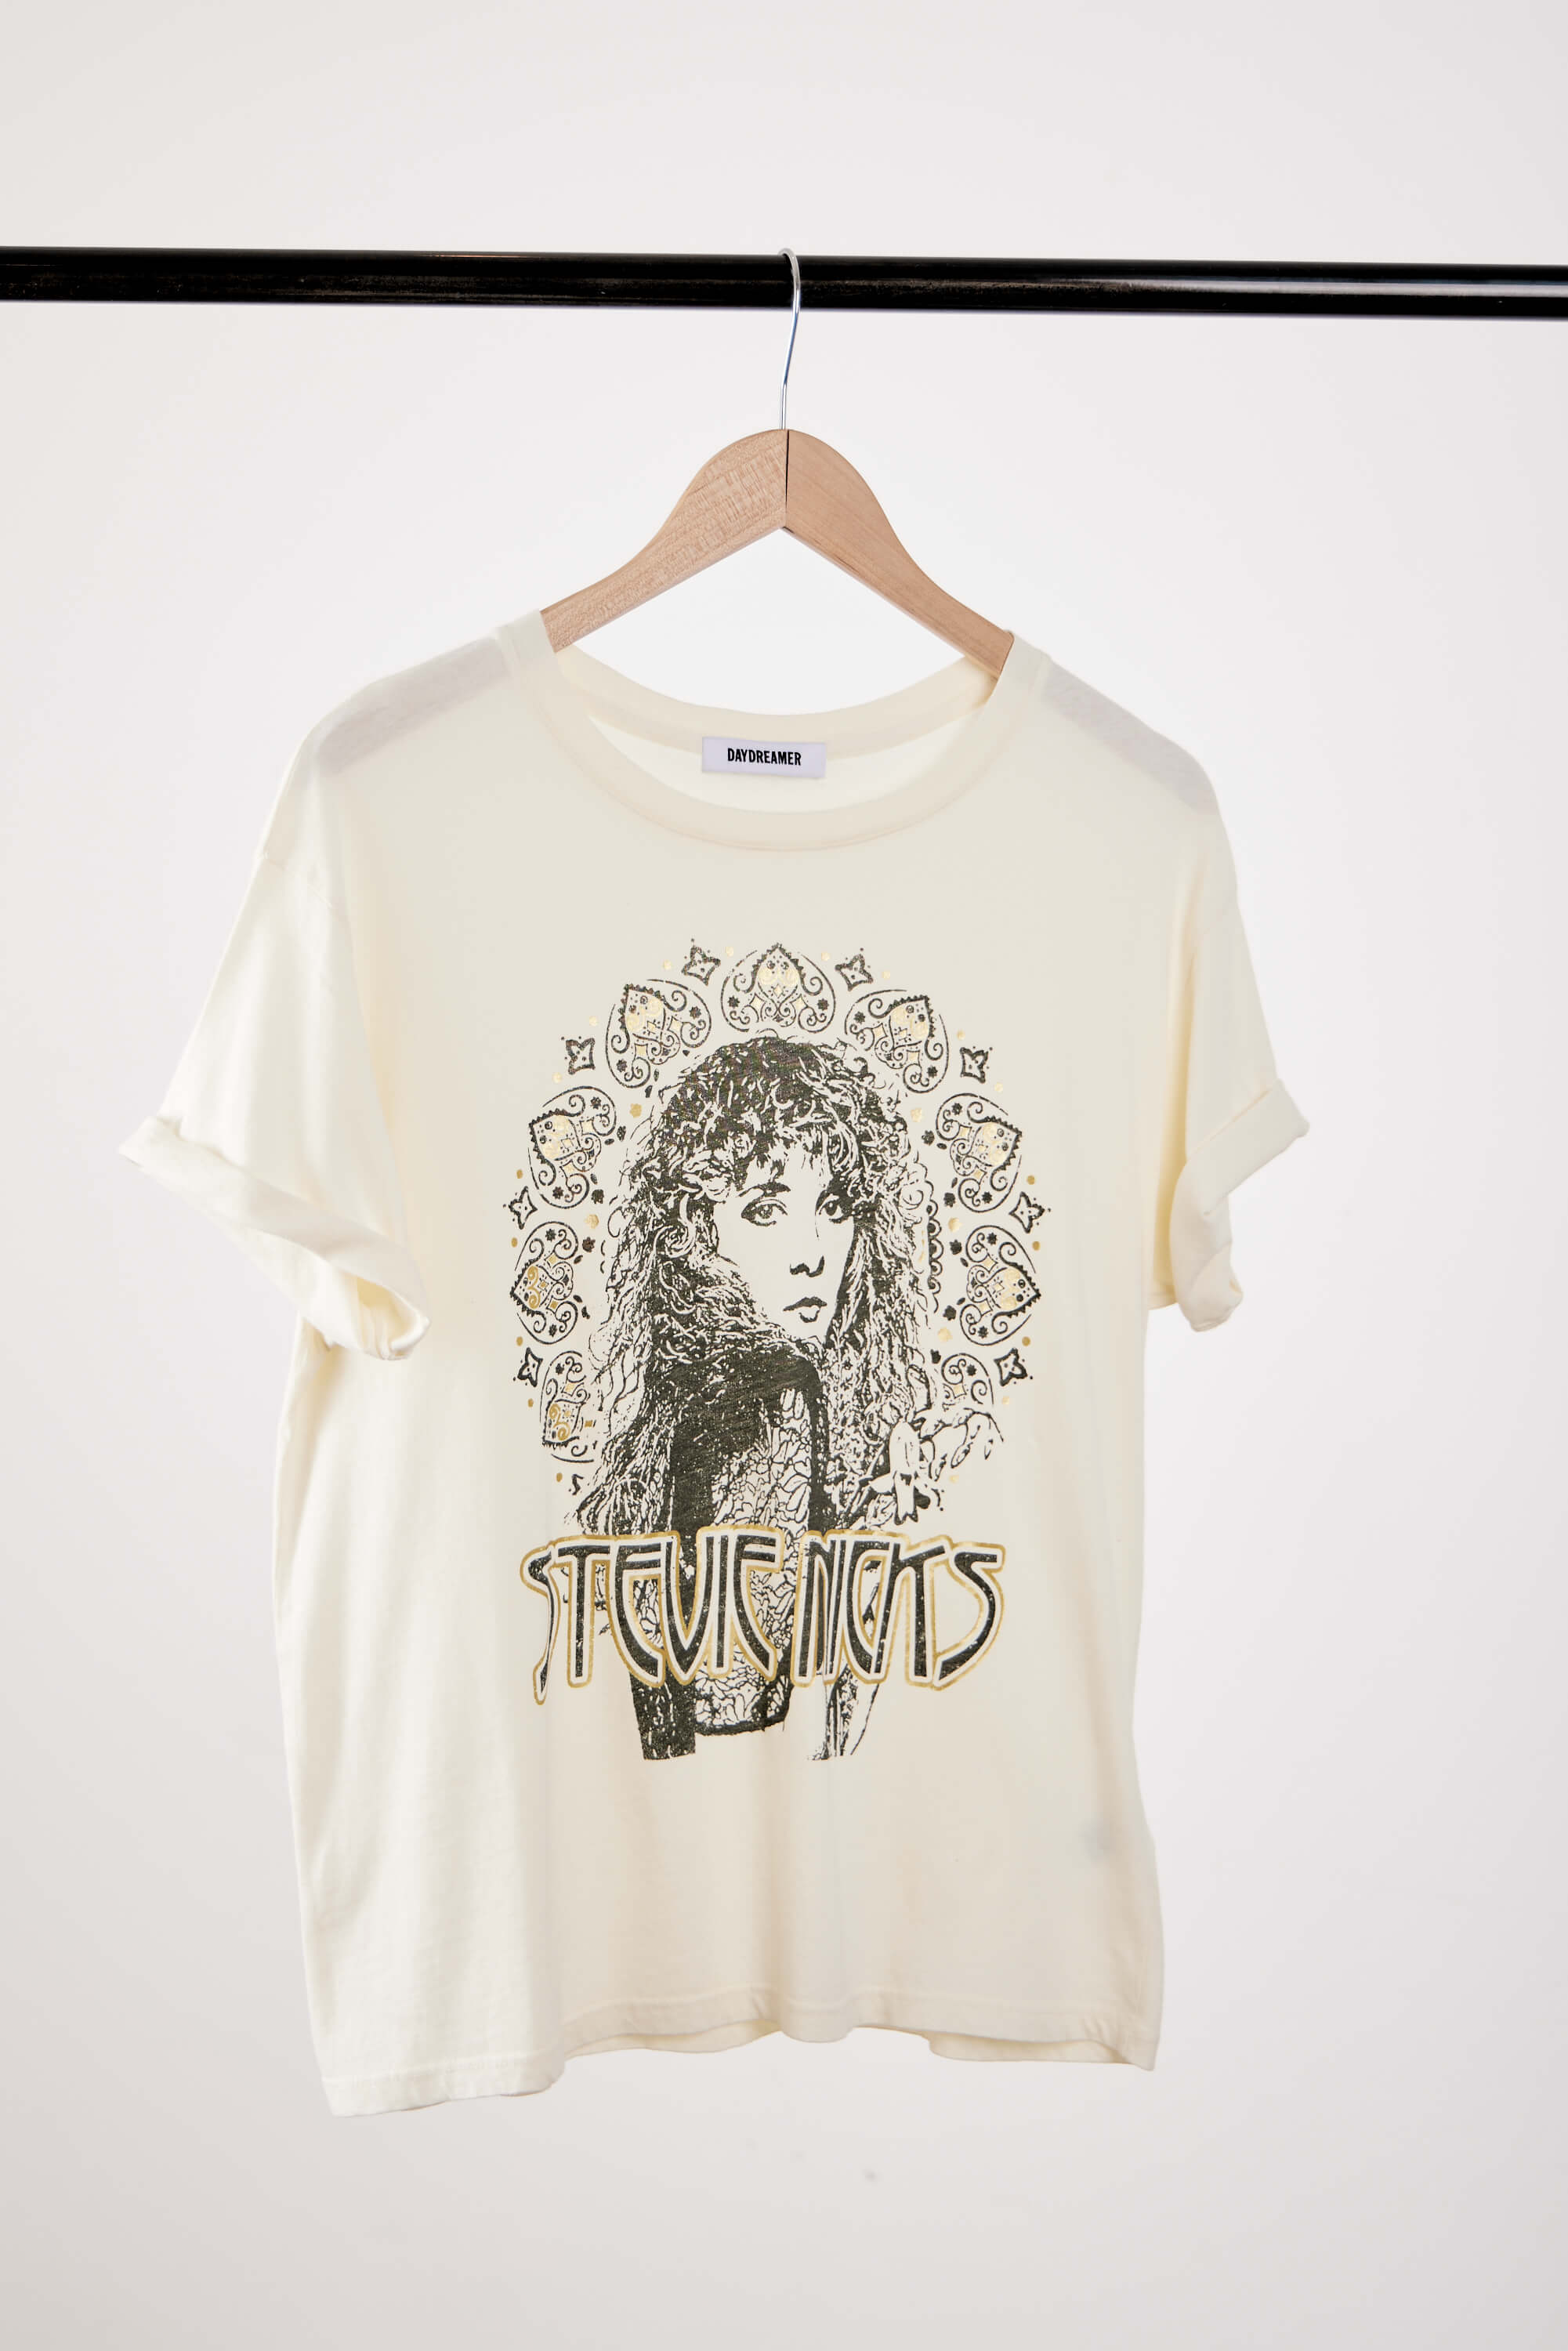 White stevie nicks short sleeve graphic band tee with gold accents